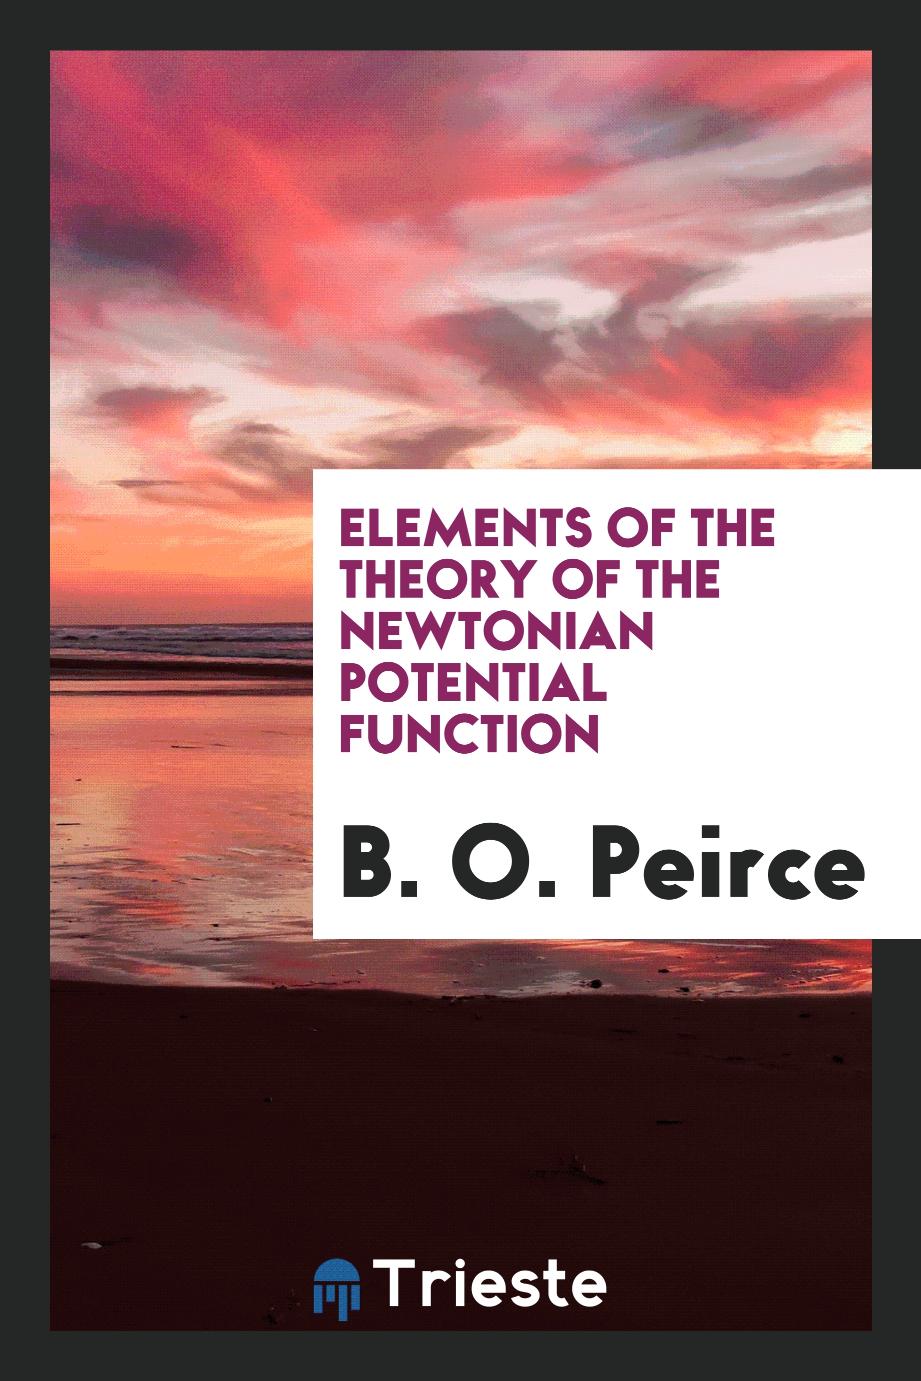 B. O. Peirce - Elements of the Theory of the Newtonian Potential Function